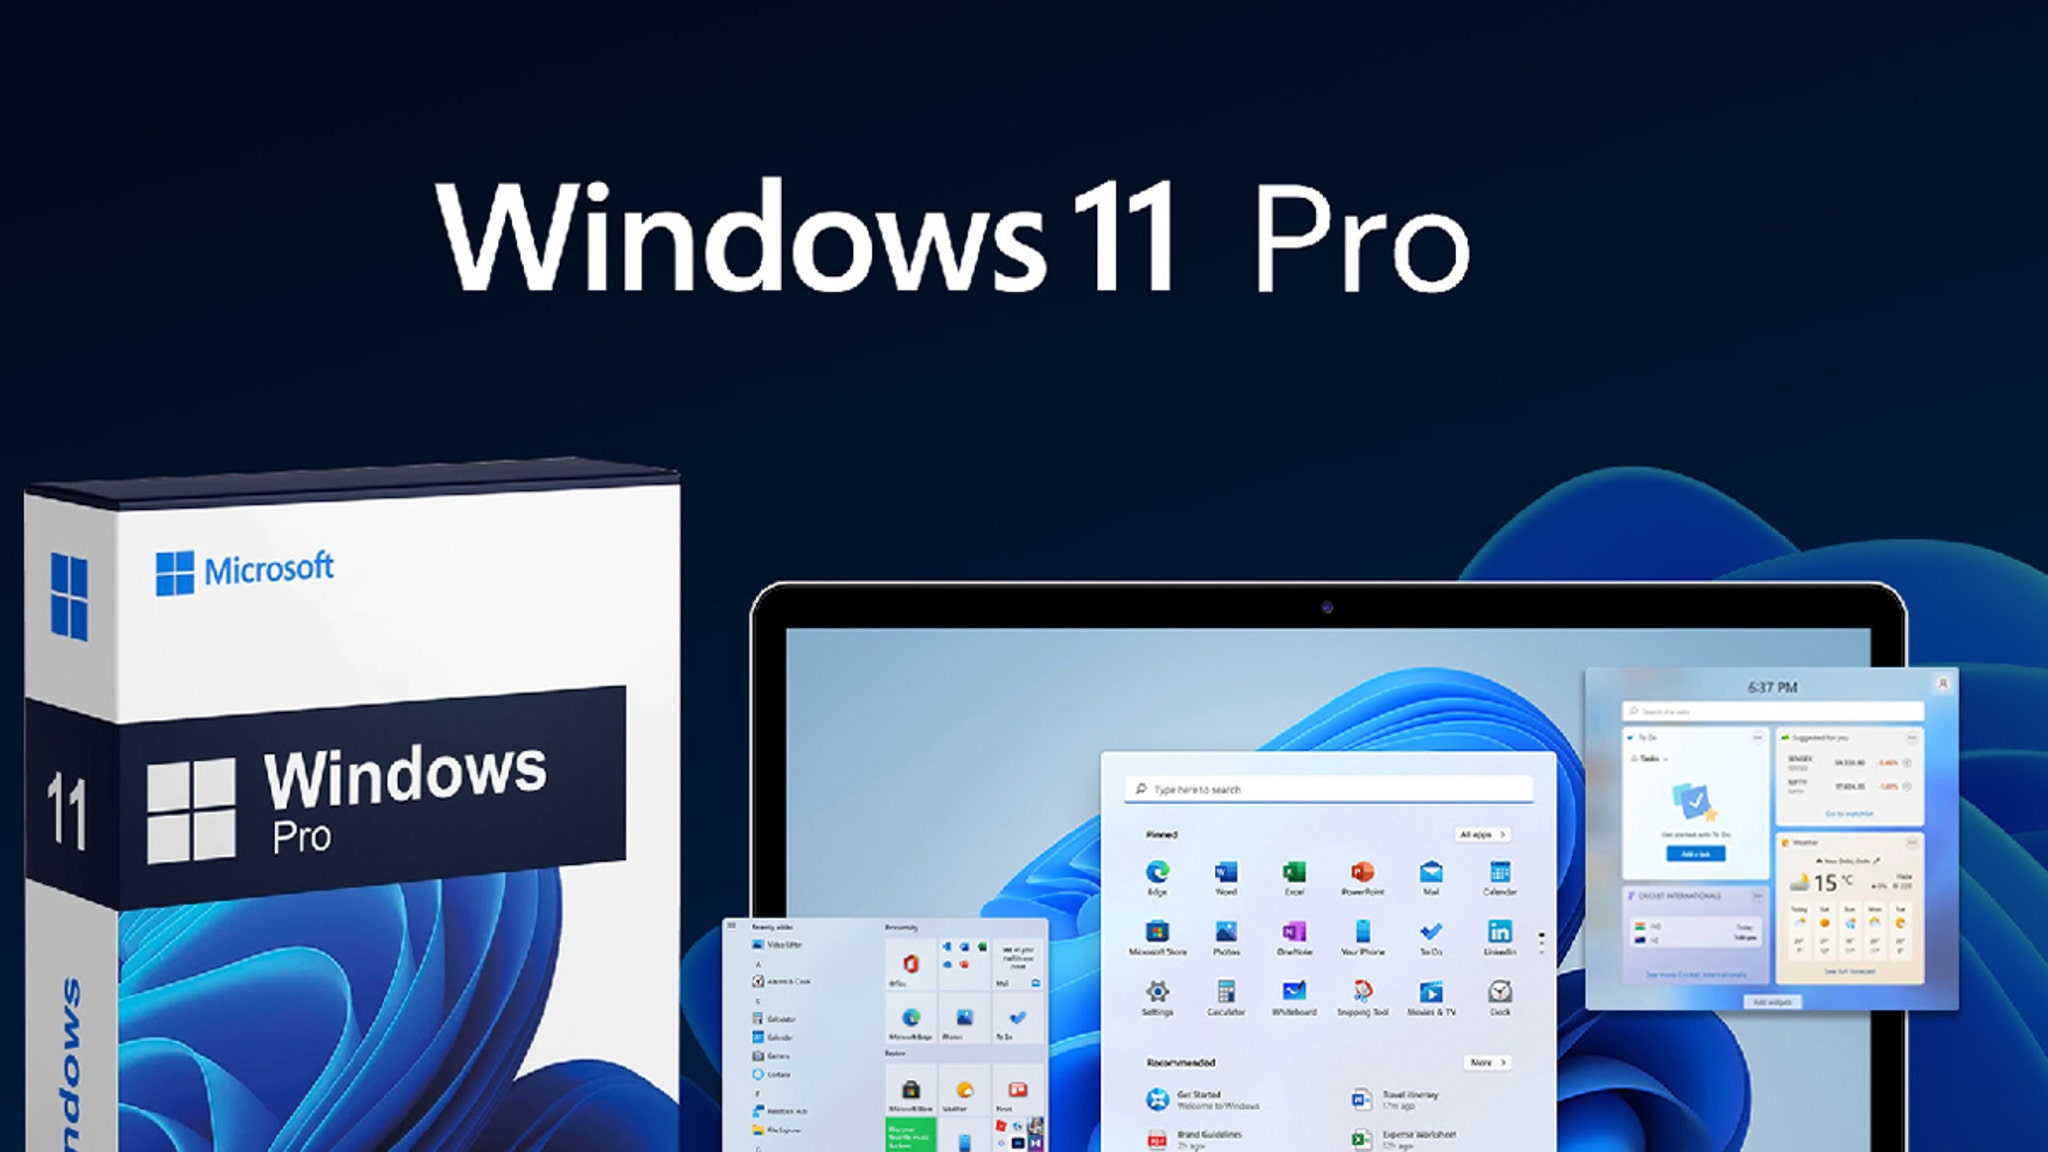 Give Your PC a Windows 11 Pro Makeover for Under $25